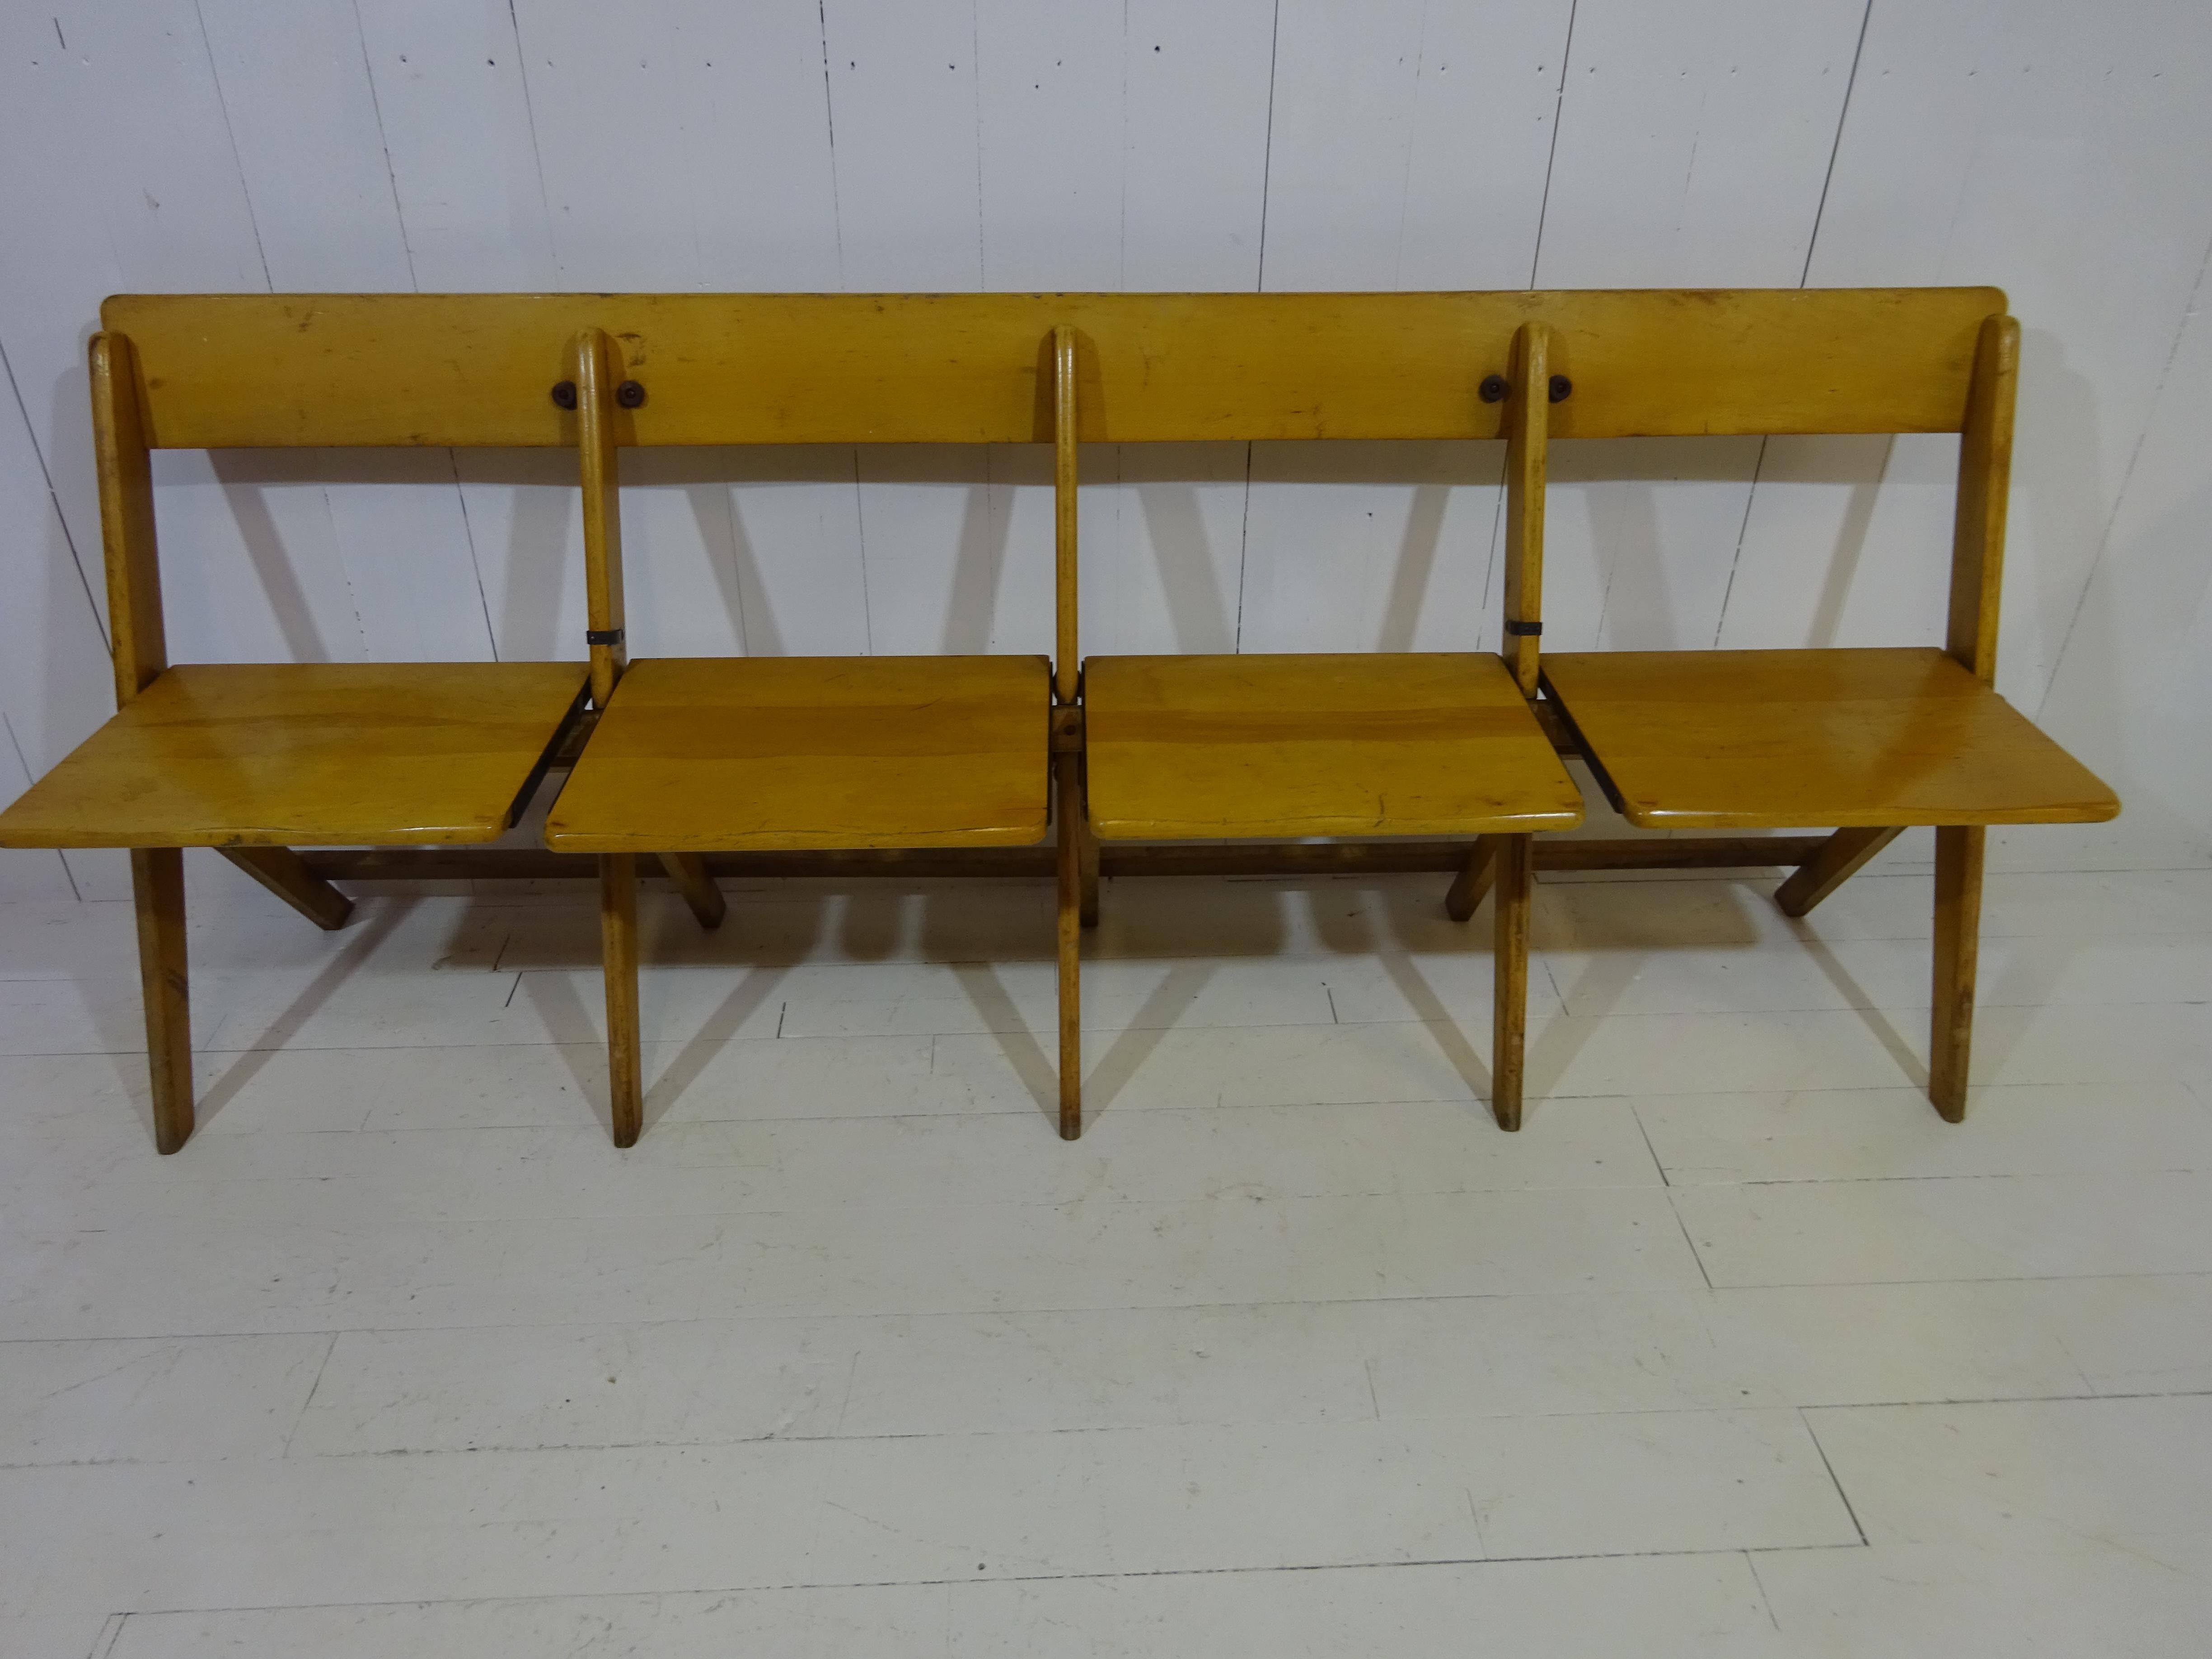 Steel 1950's Vintage Conjoined Folding Chapel Chairs For Sale